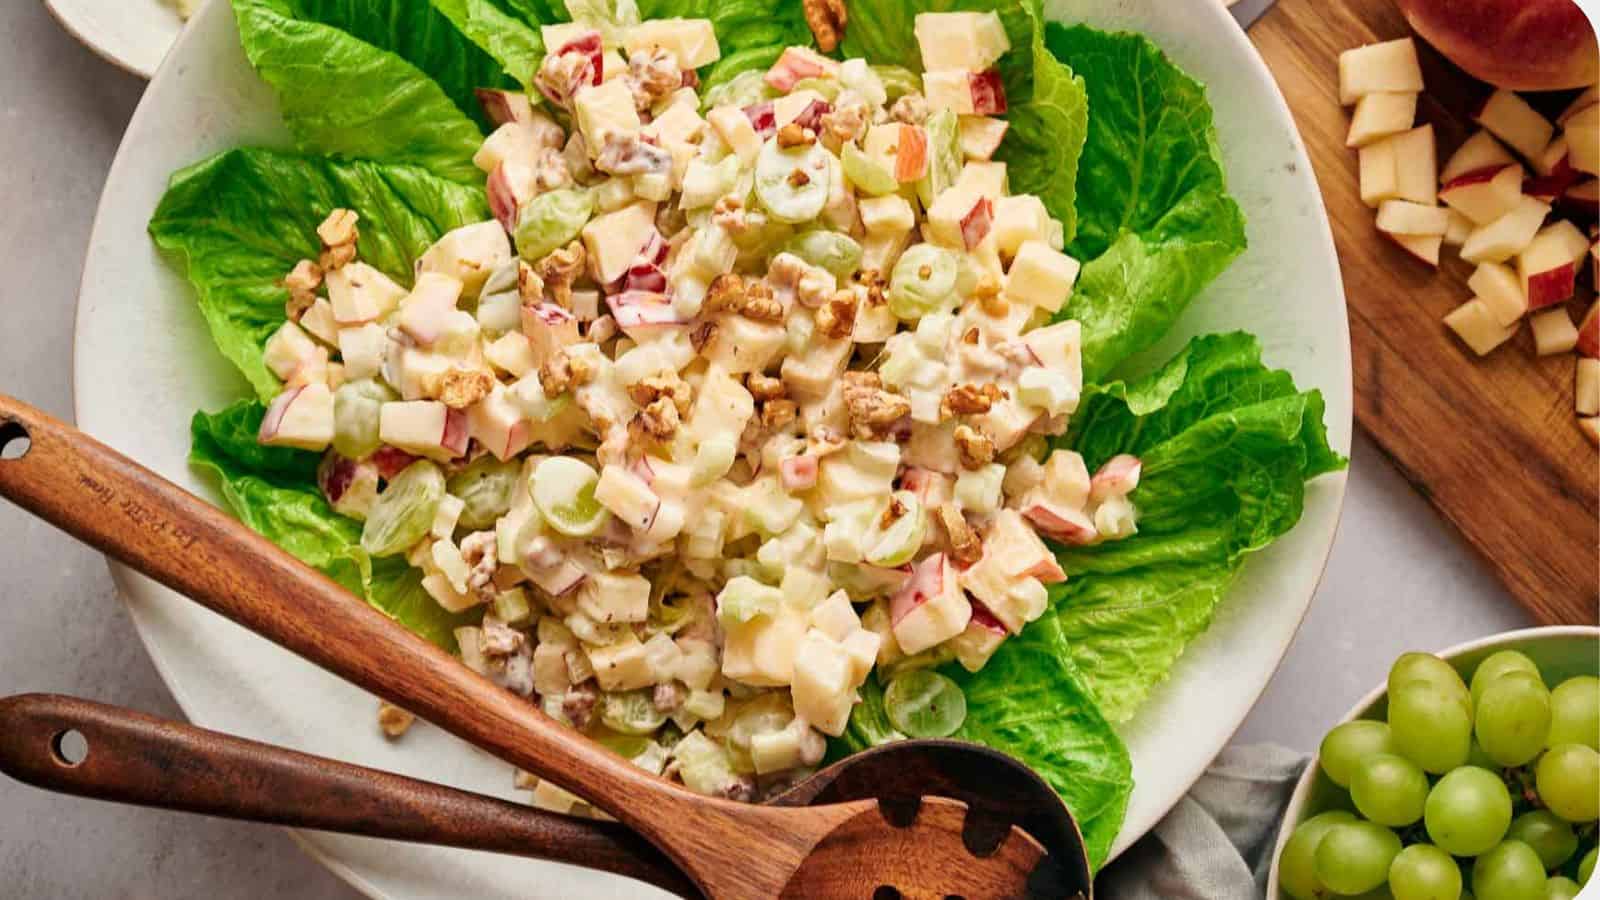 Waldorf salad on a bed of lettuce, with salad servers resting on top.